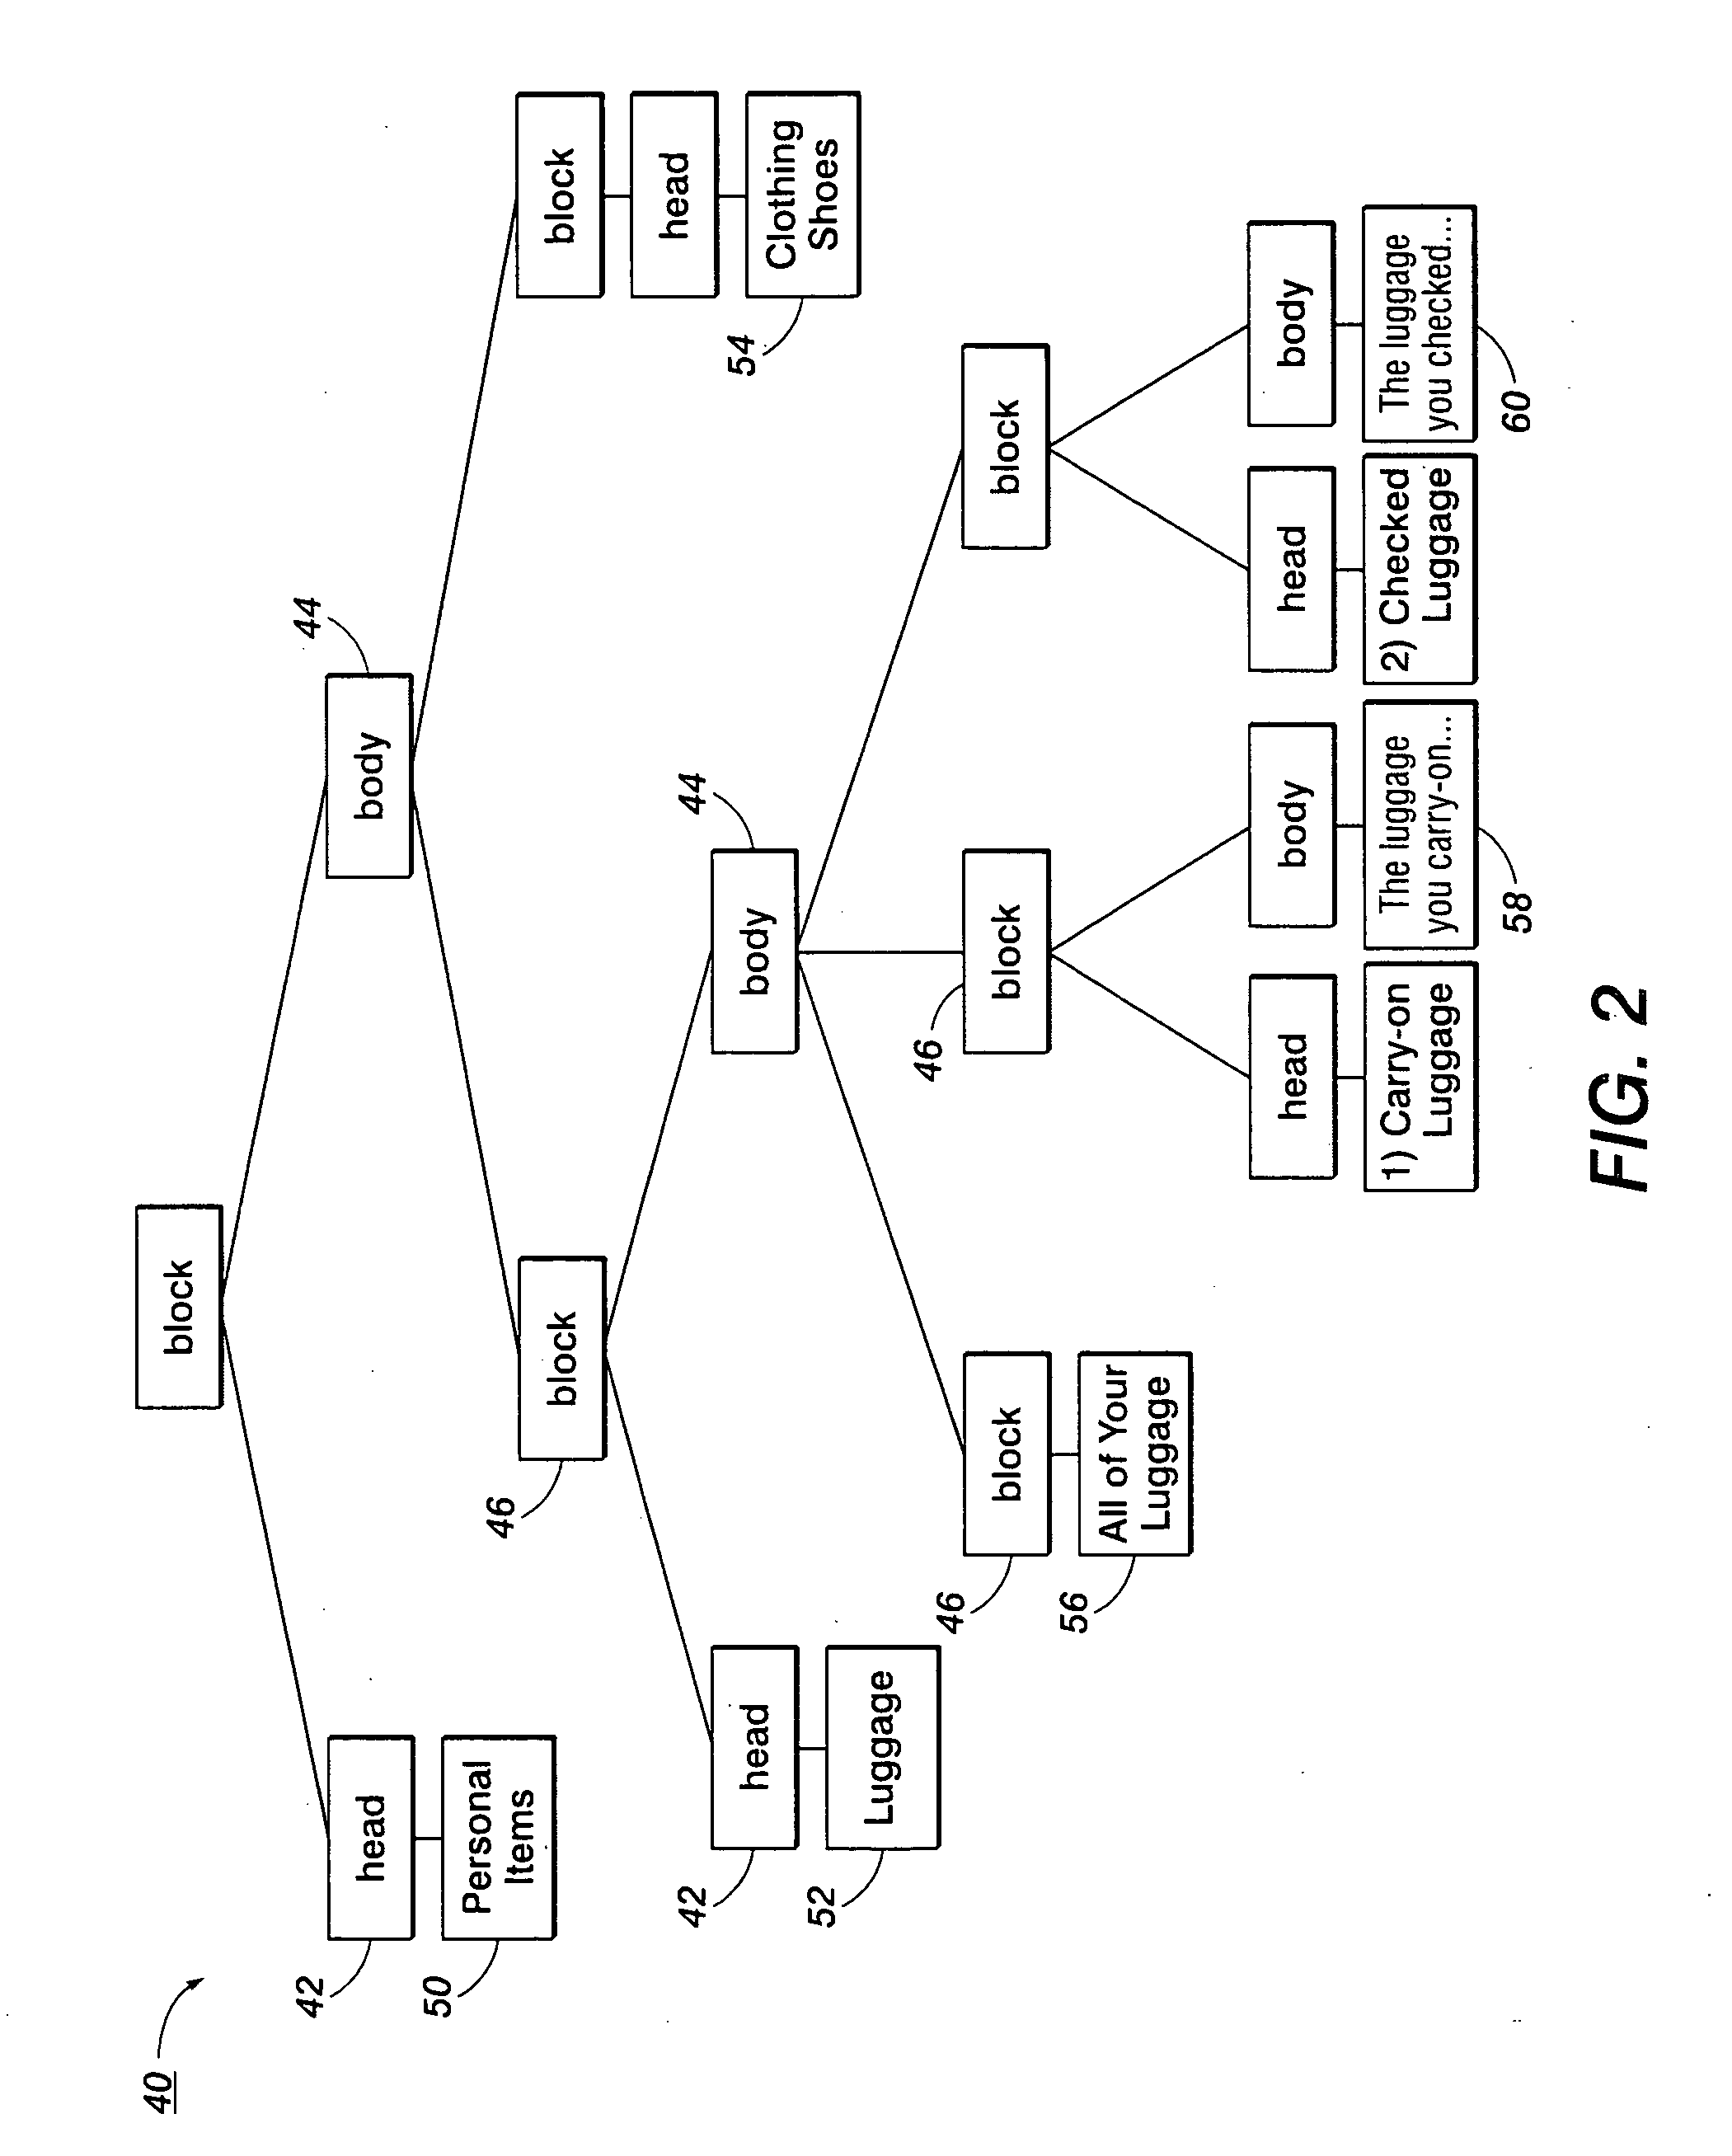 Method and apparatus for structuring documents based on layout, content and collection